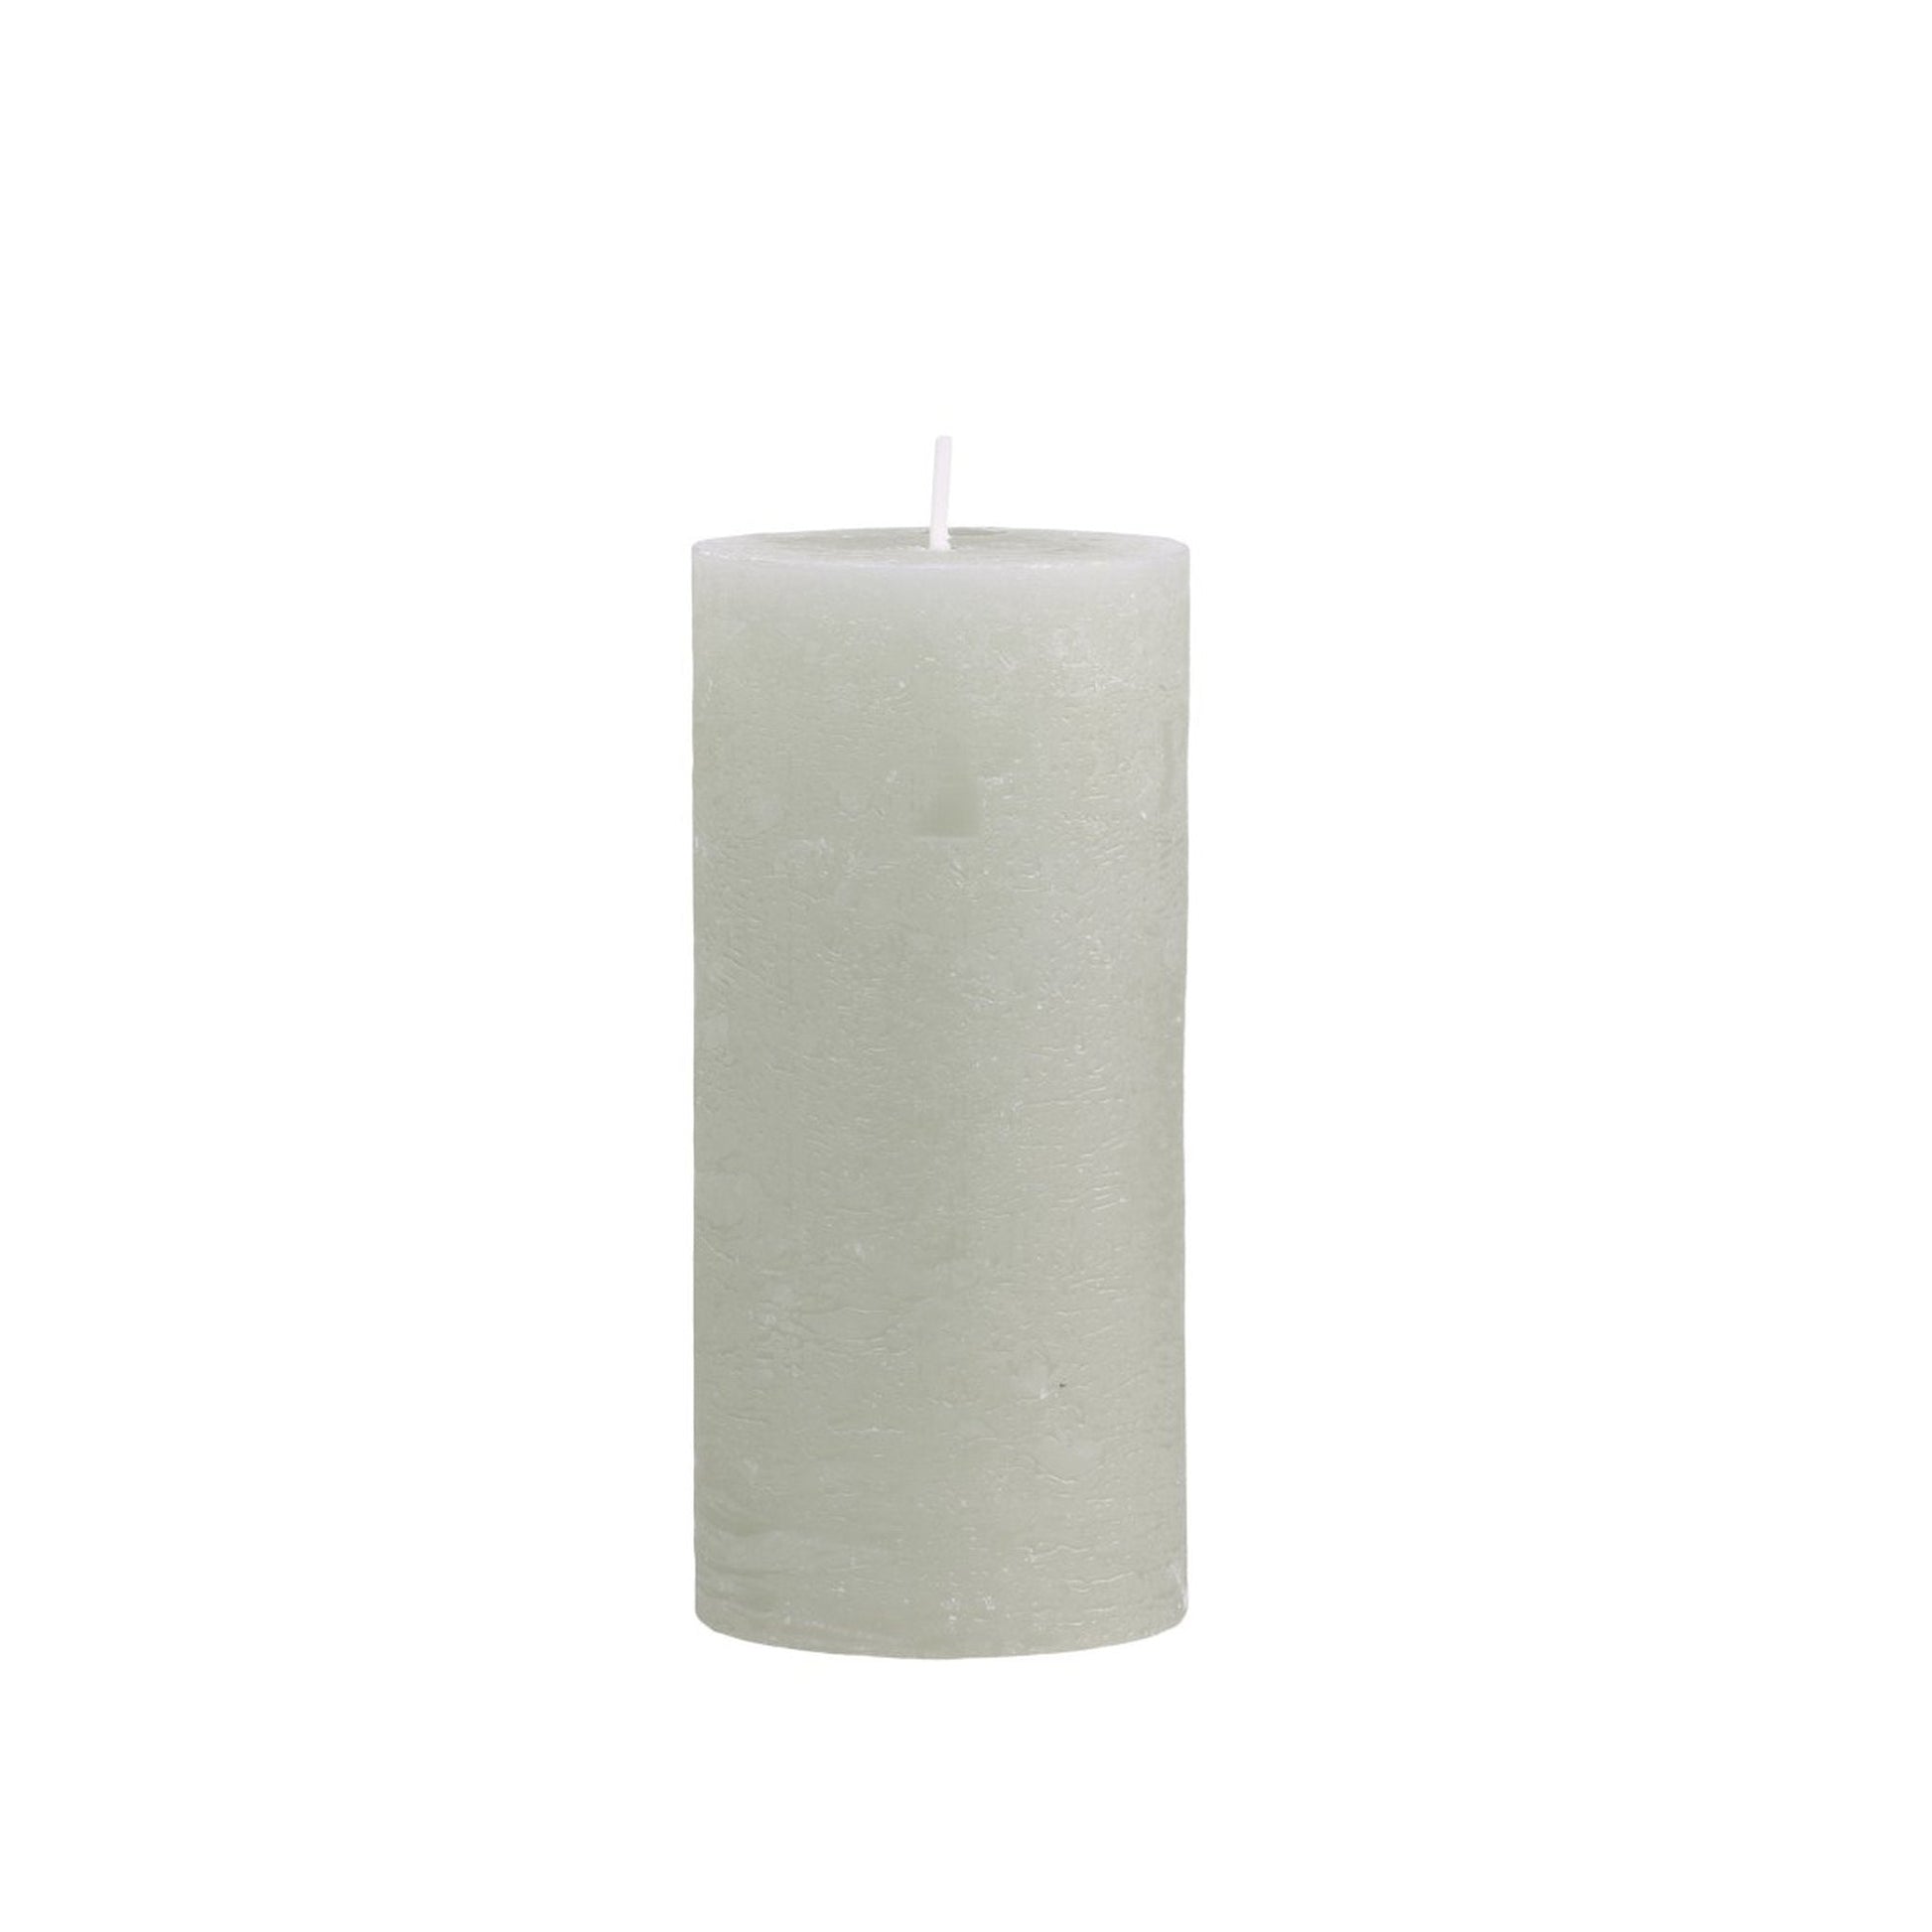 Verte Rustic Pillar Candle 60 hours - Bumble Living